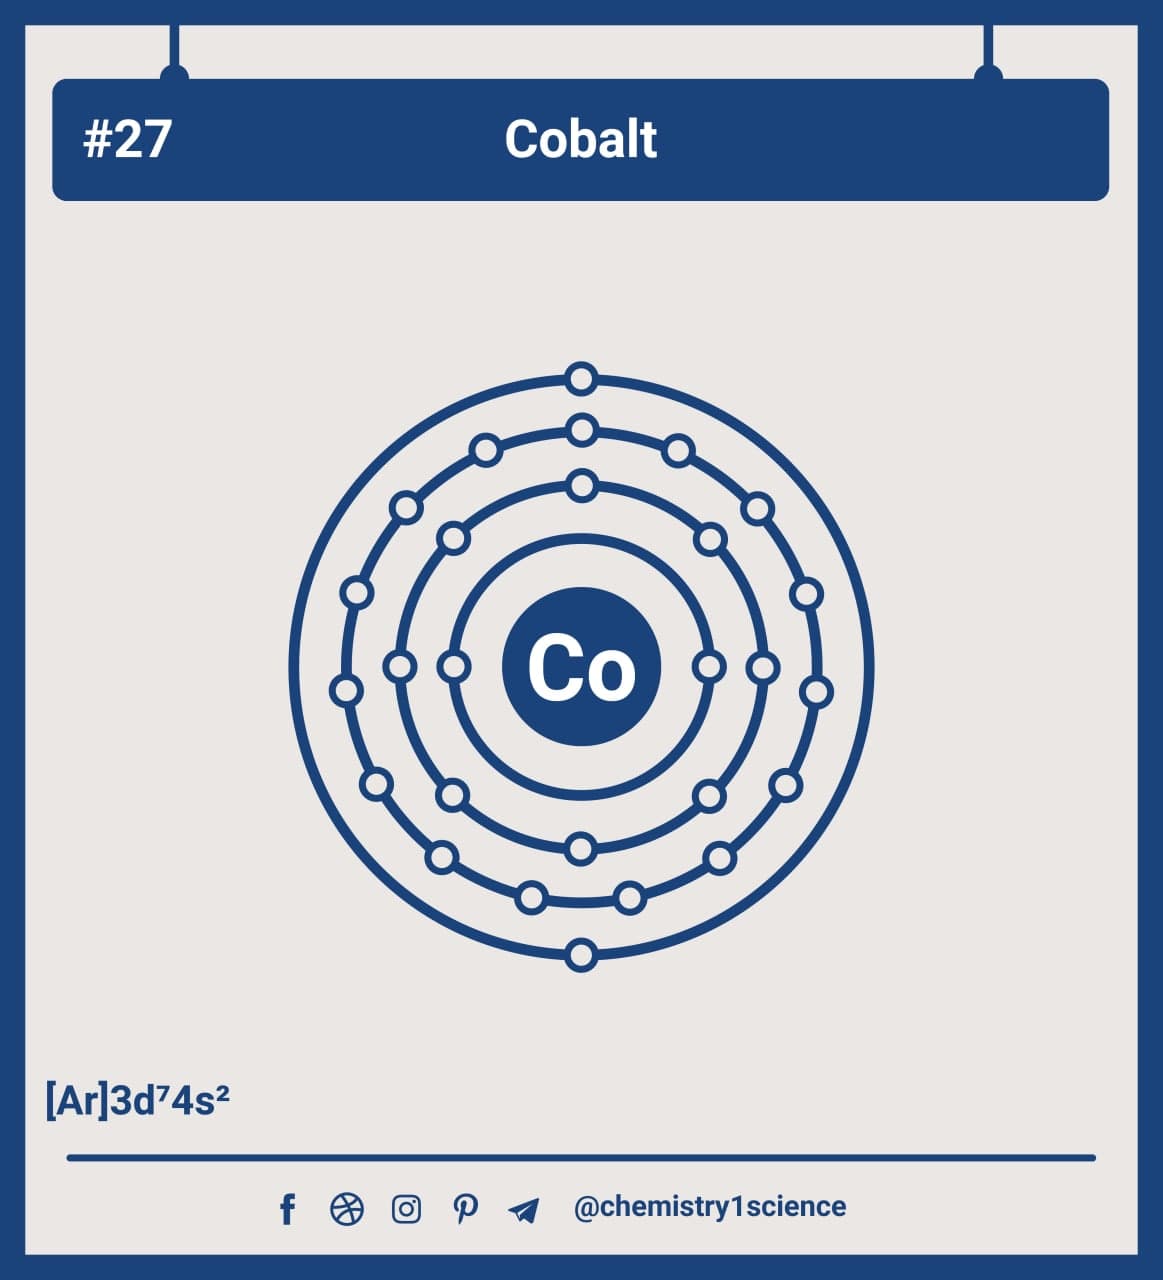 Atom Diagrams Showing Electron Shell Configurations of the Cobalt